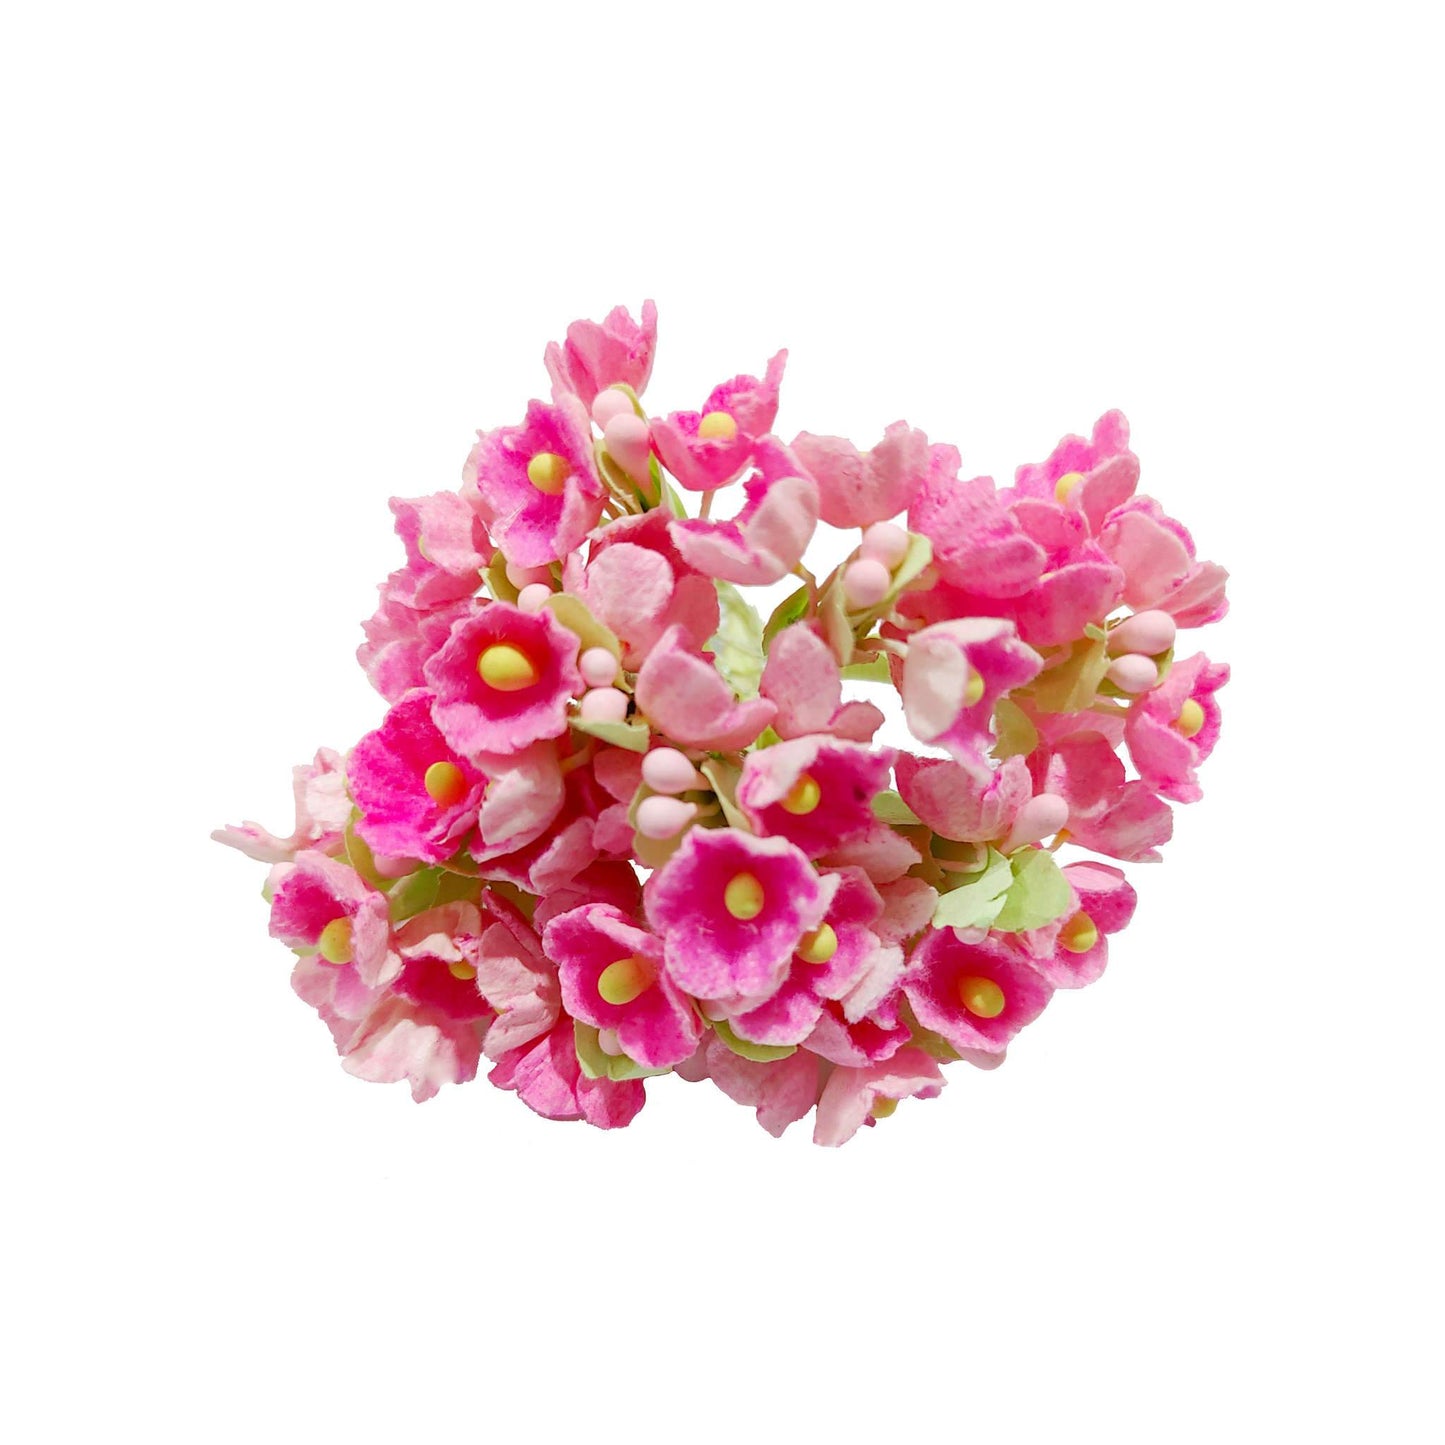 Indian Petals Beautiful Small Paper Flowers for DIY Craft, Trousseau Packing or Decoration - Design 29, Pink